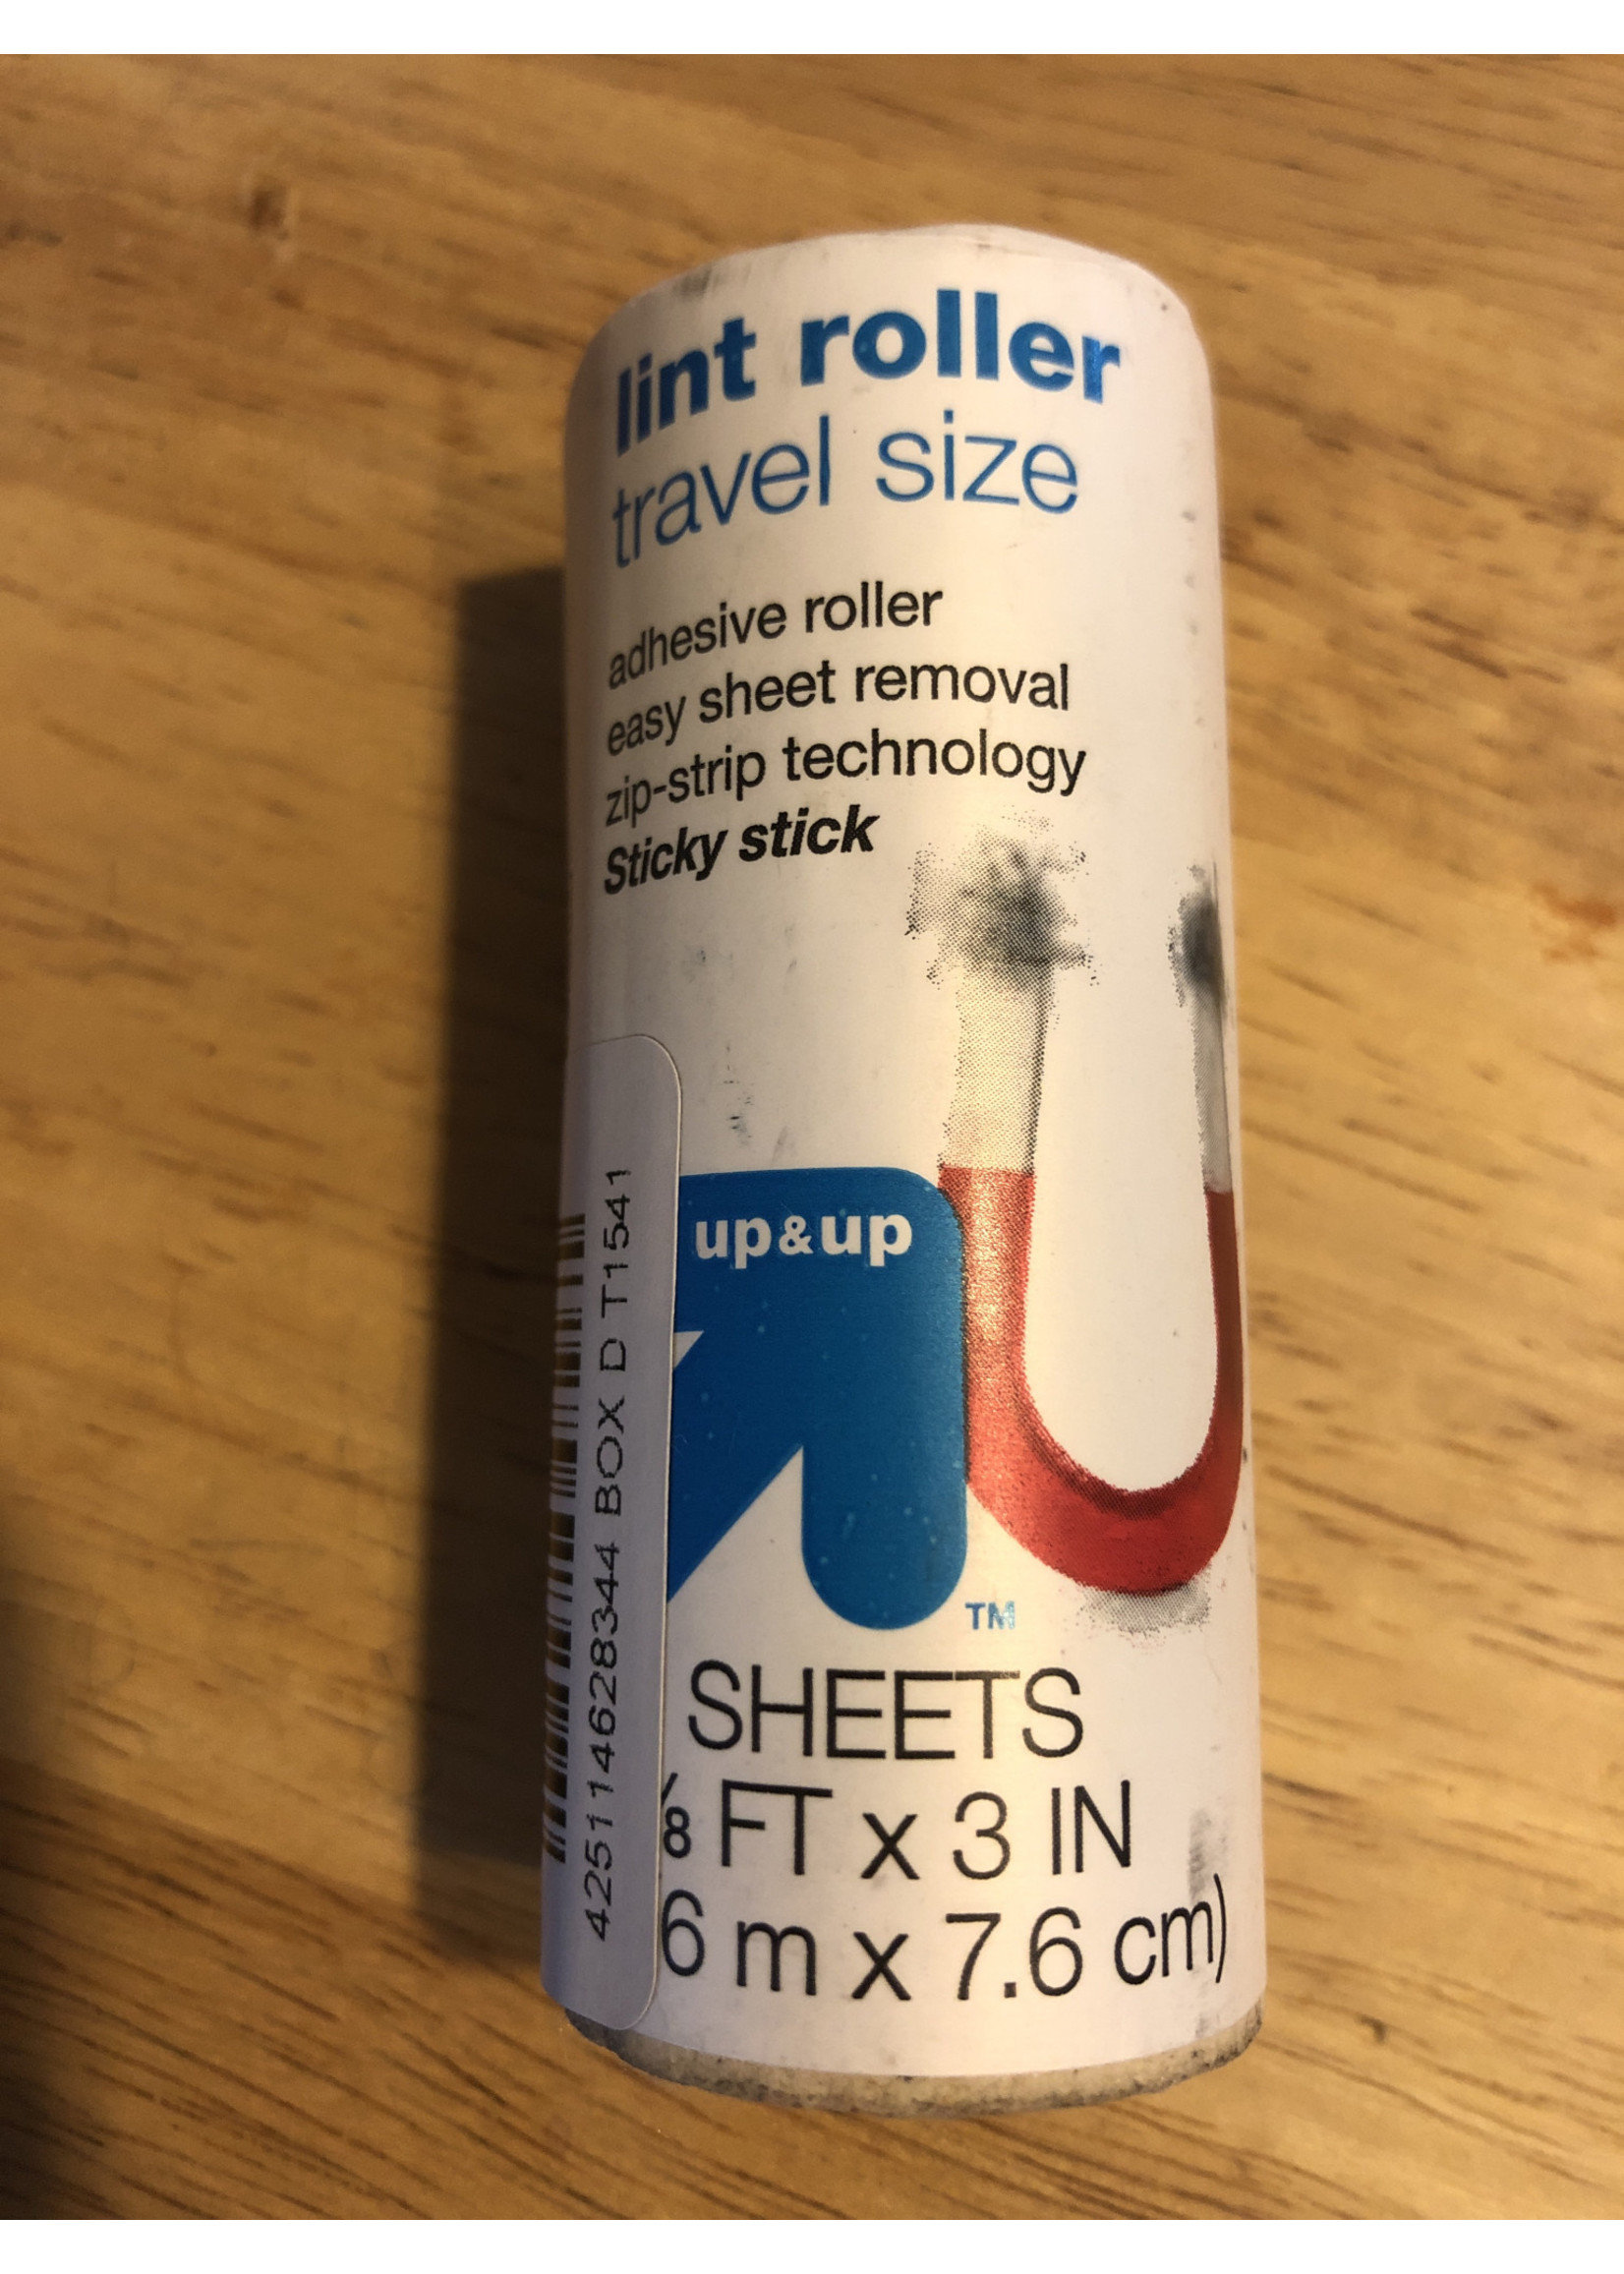 Travel Size Lint Roller Refill 30 Sheets - up & up